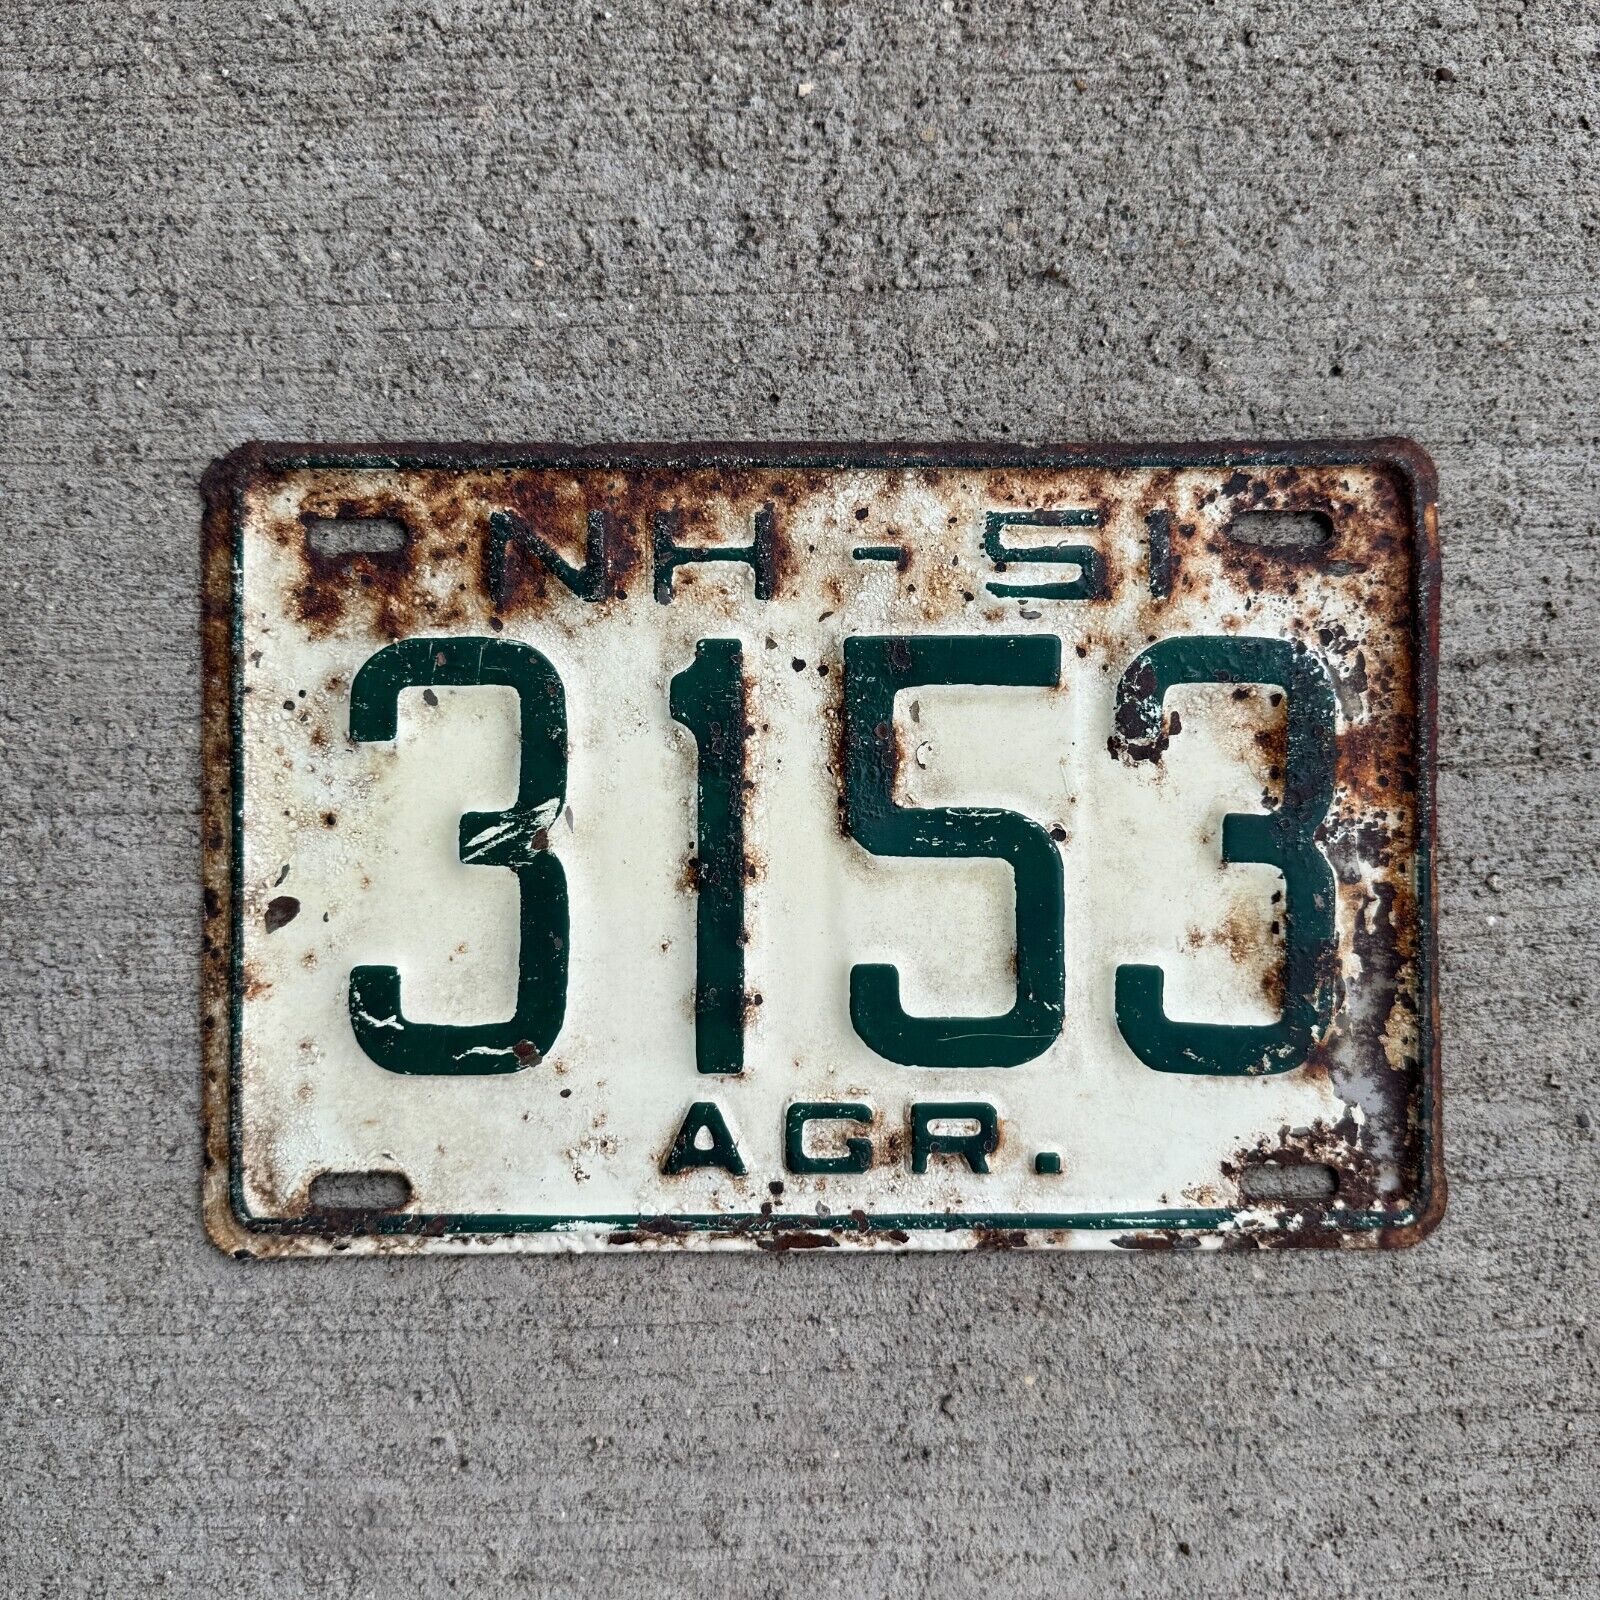 1951 New Hampshire AGRICULTURAL License Plate Vintage Auto Garage Decor Ag 3153